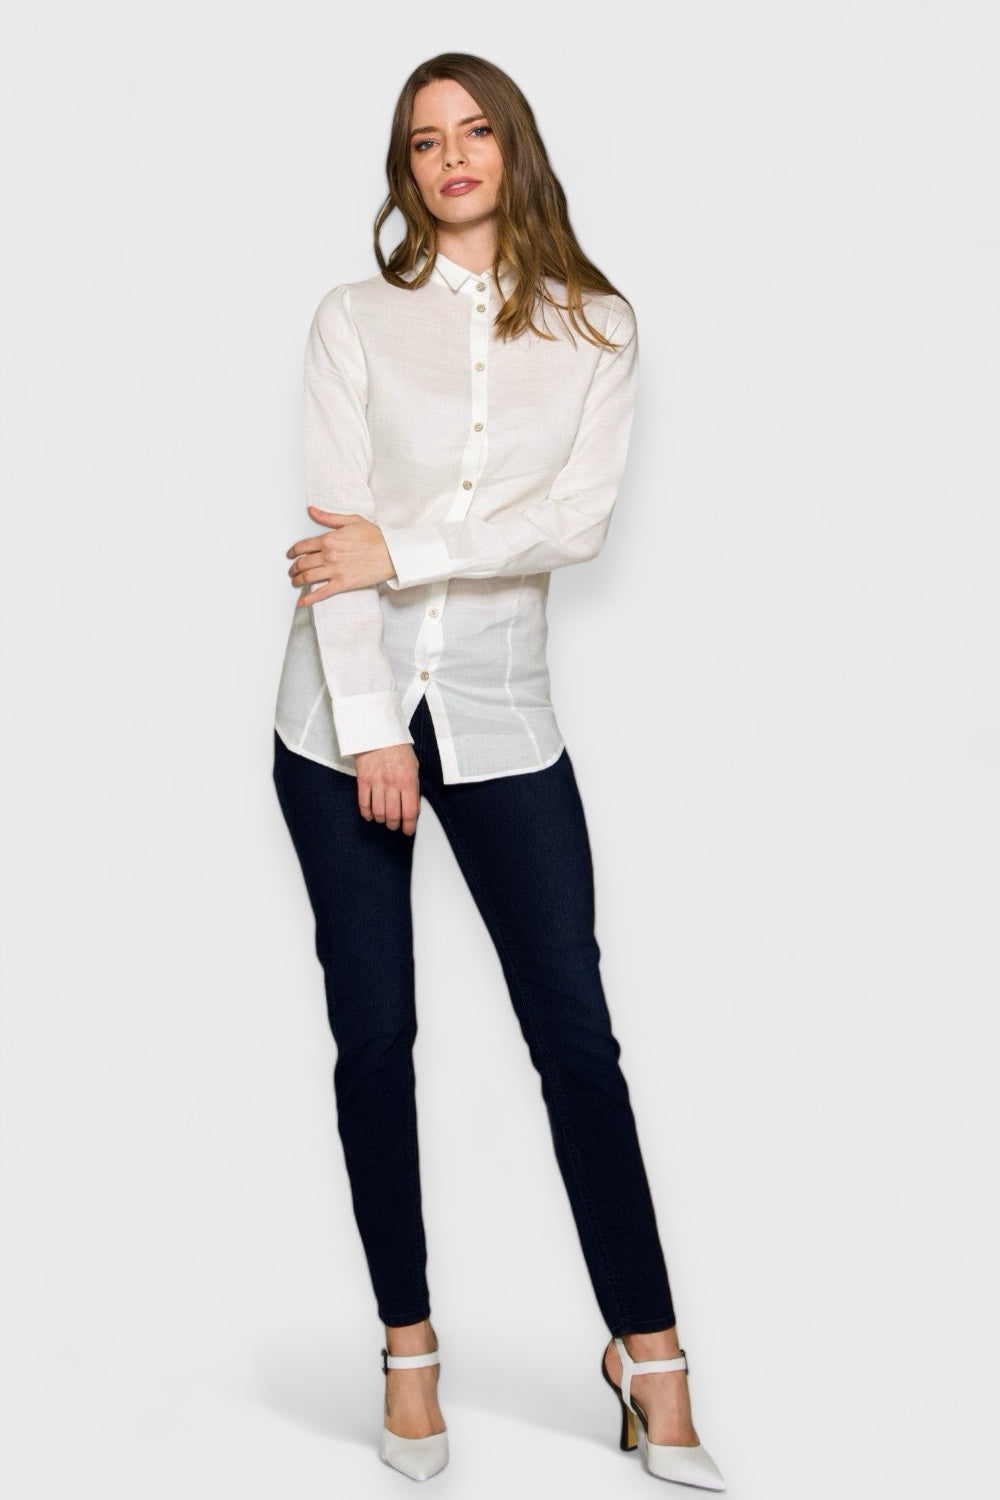 Bella Off White Collared Button Up Long Sleeve Shirt by Marise.Eco.Couture Italian Women's Clothing paired with Gatsby Black and White Pumps